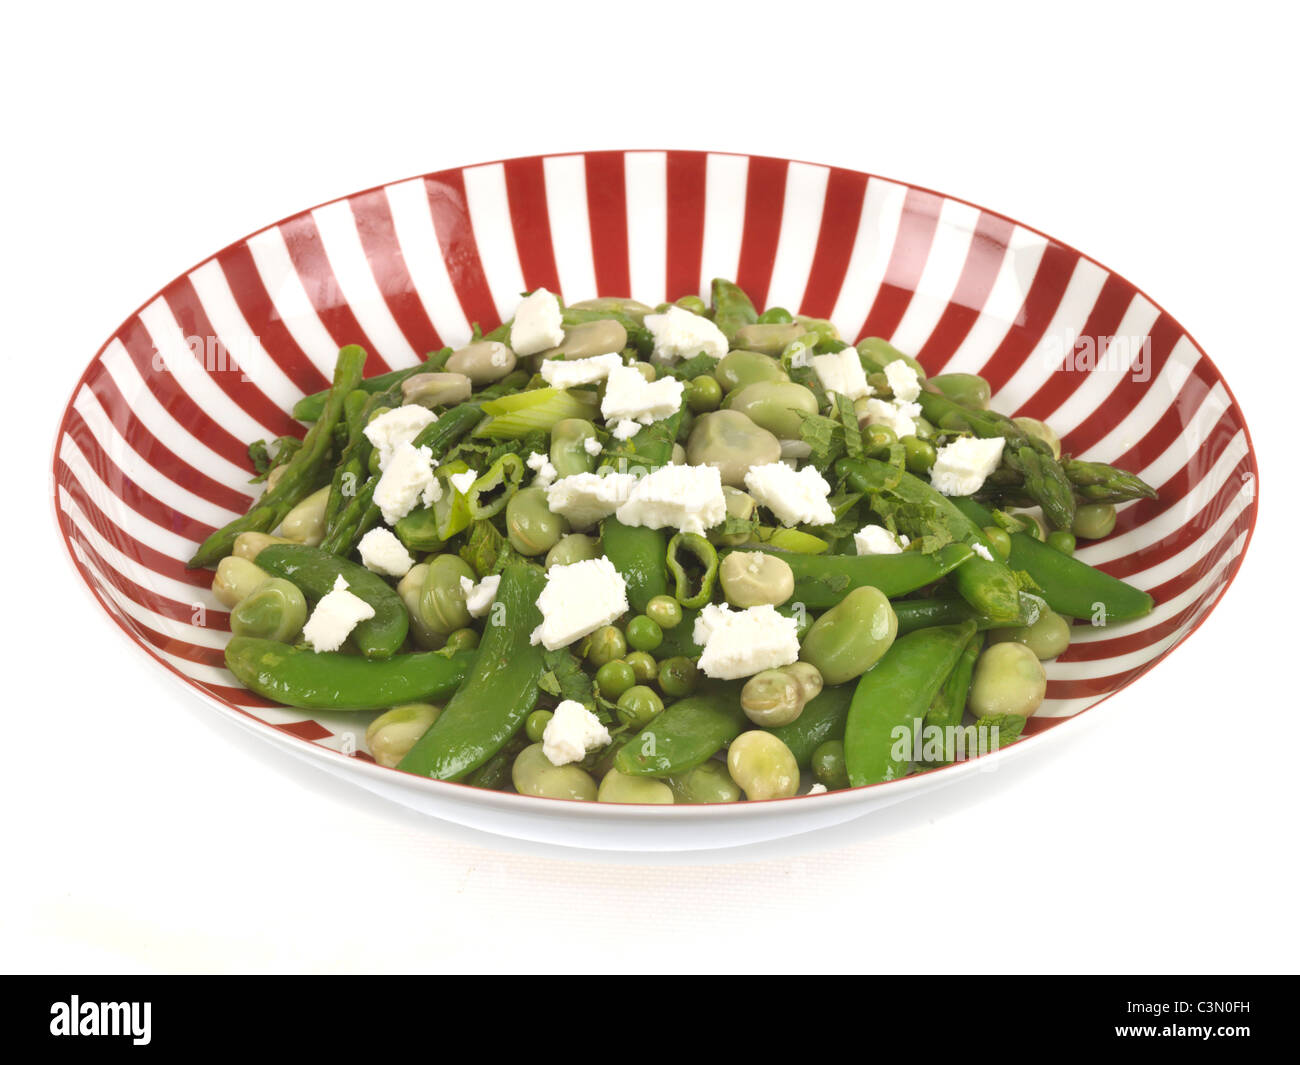 Freshly Prepared Health Broad Bean Salad With Fresh Peas And Feta Cheese Against A White Background With No People And A Clipping Path Stock Photo